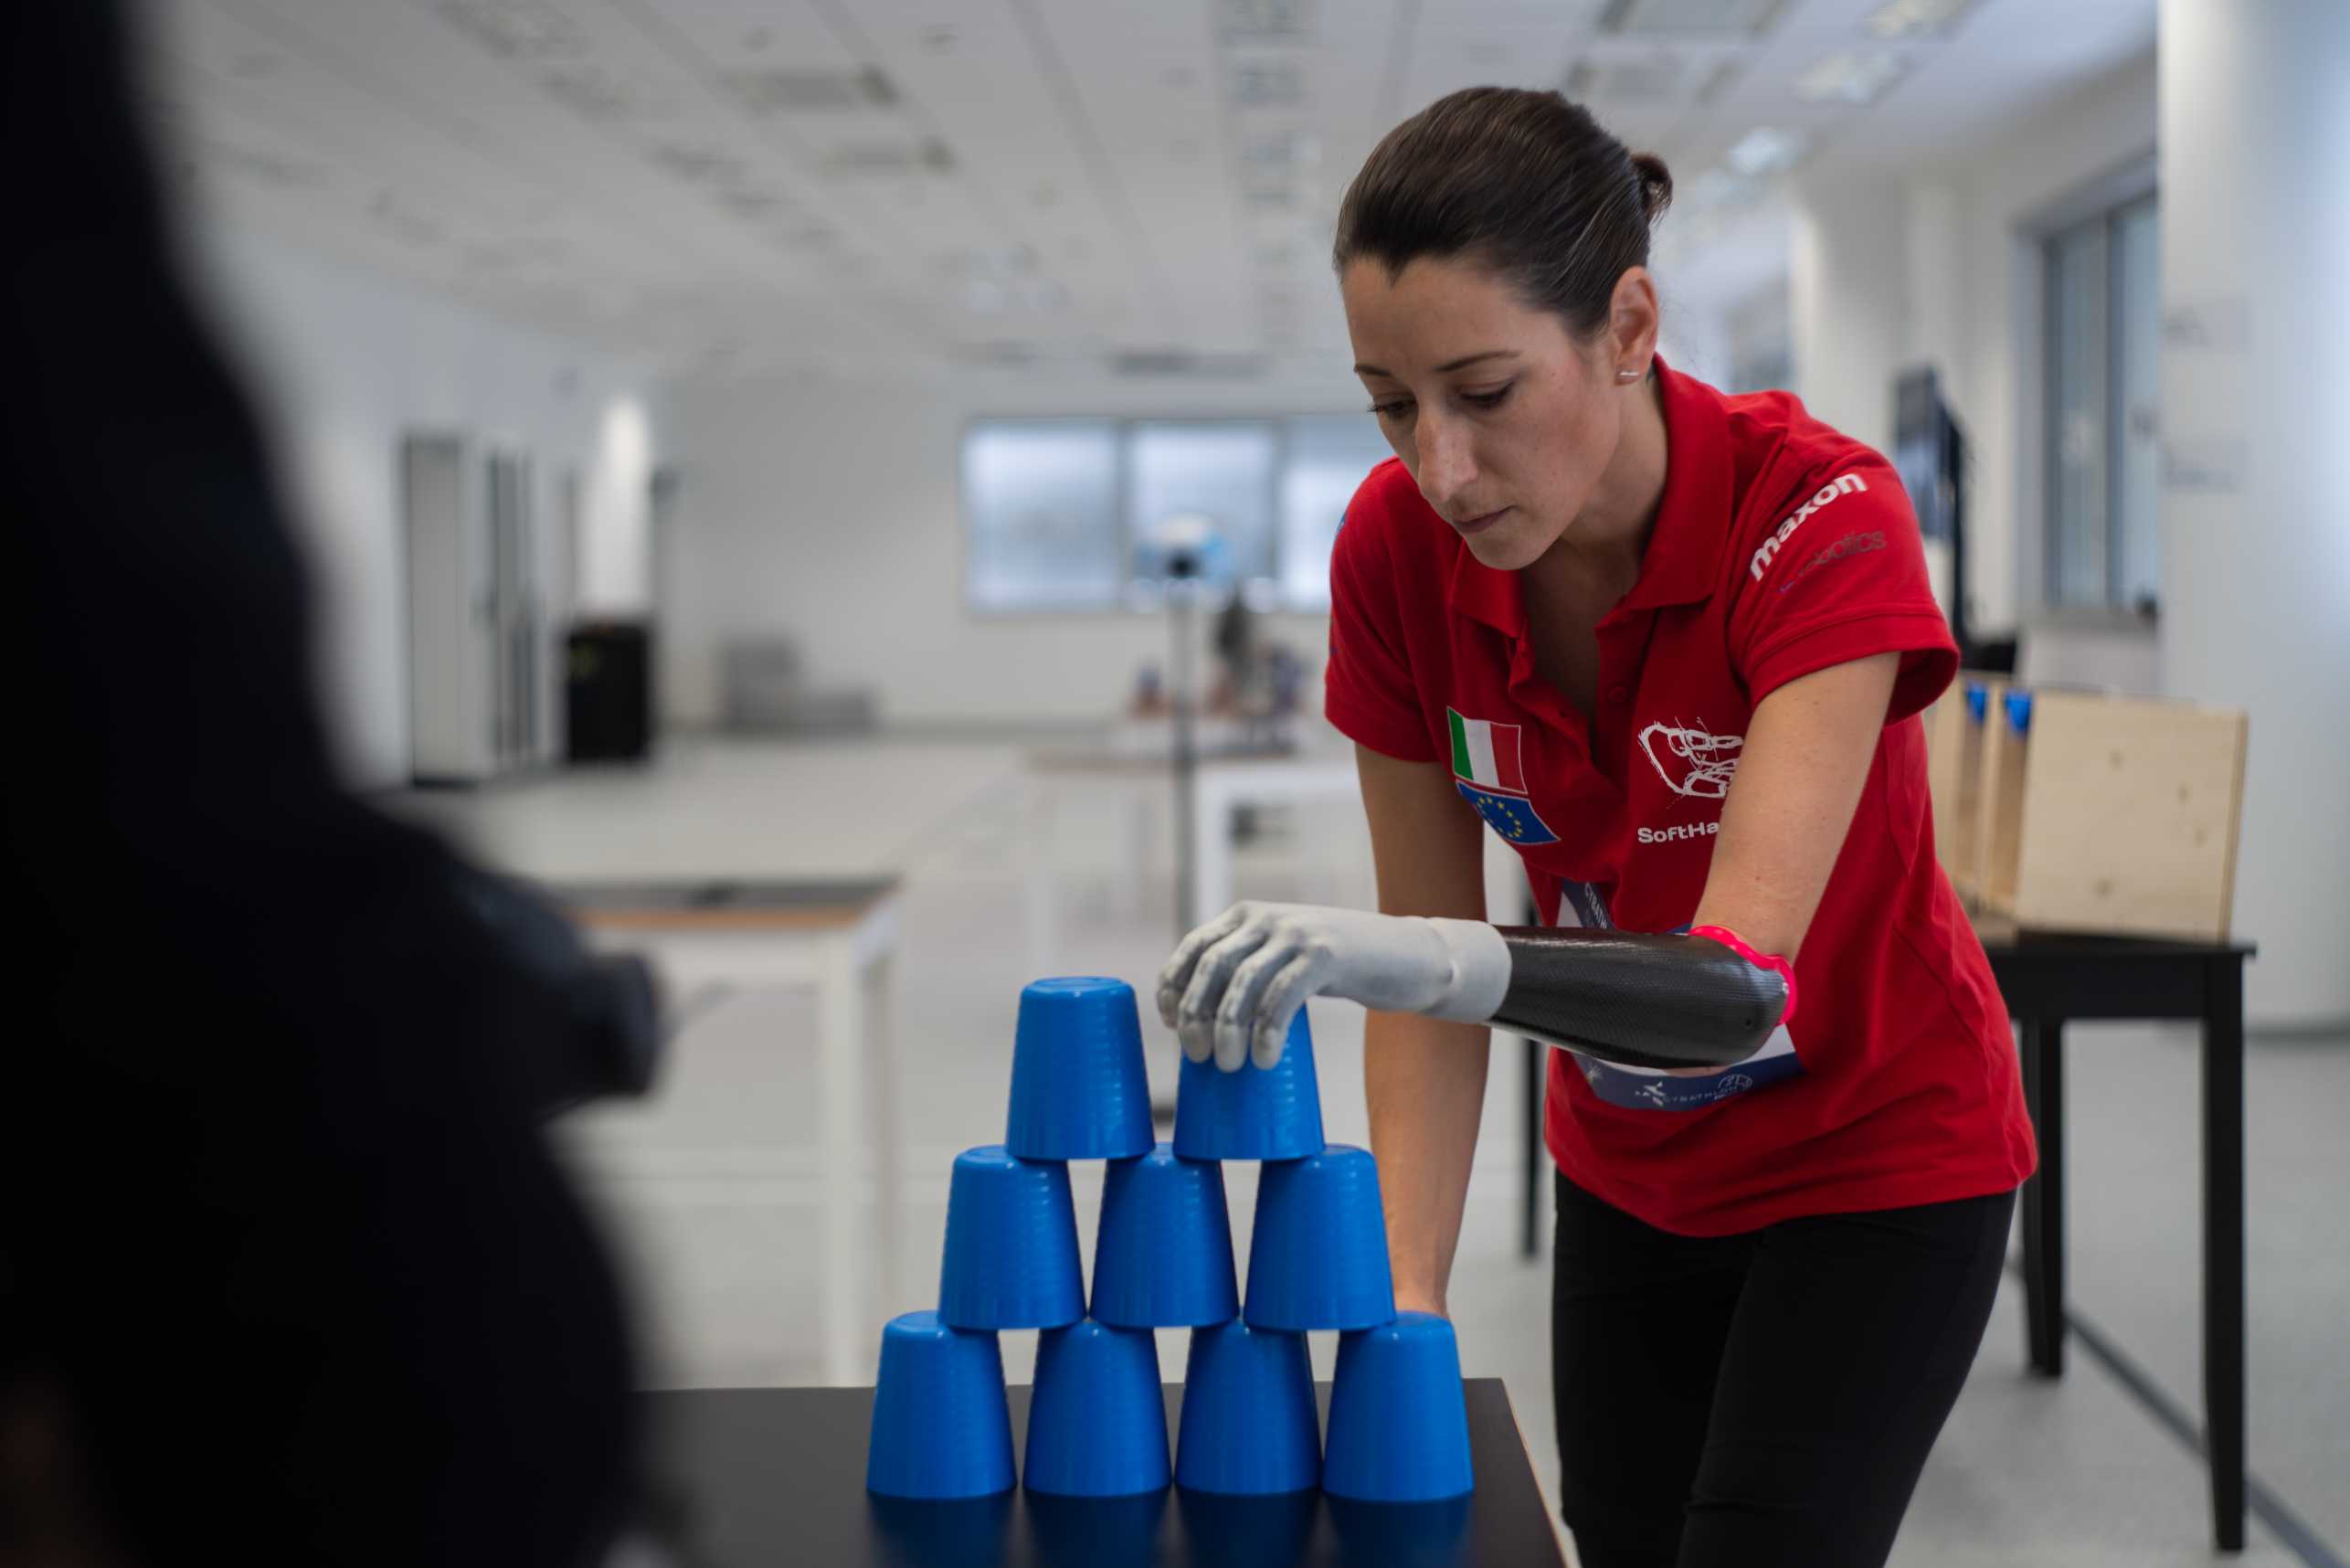 Maria Fossati, designer and researcher, using her prosthetic arm to make a pyramid of blue cups.